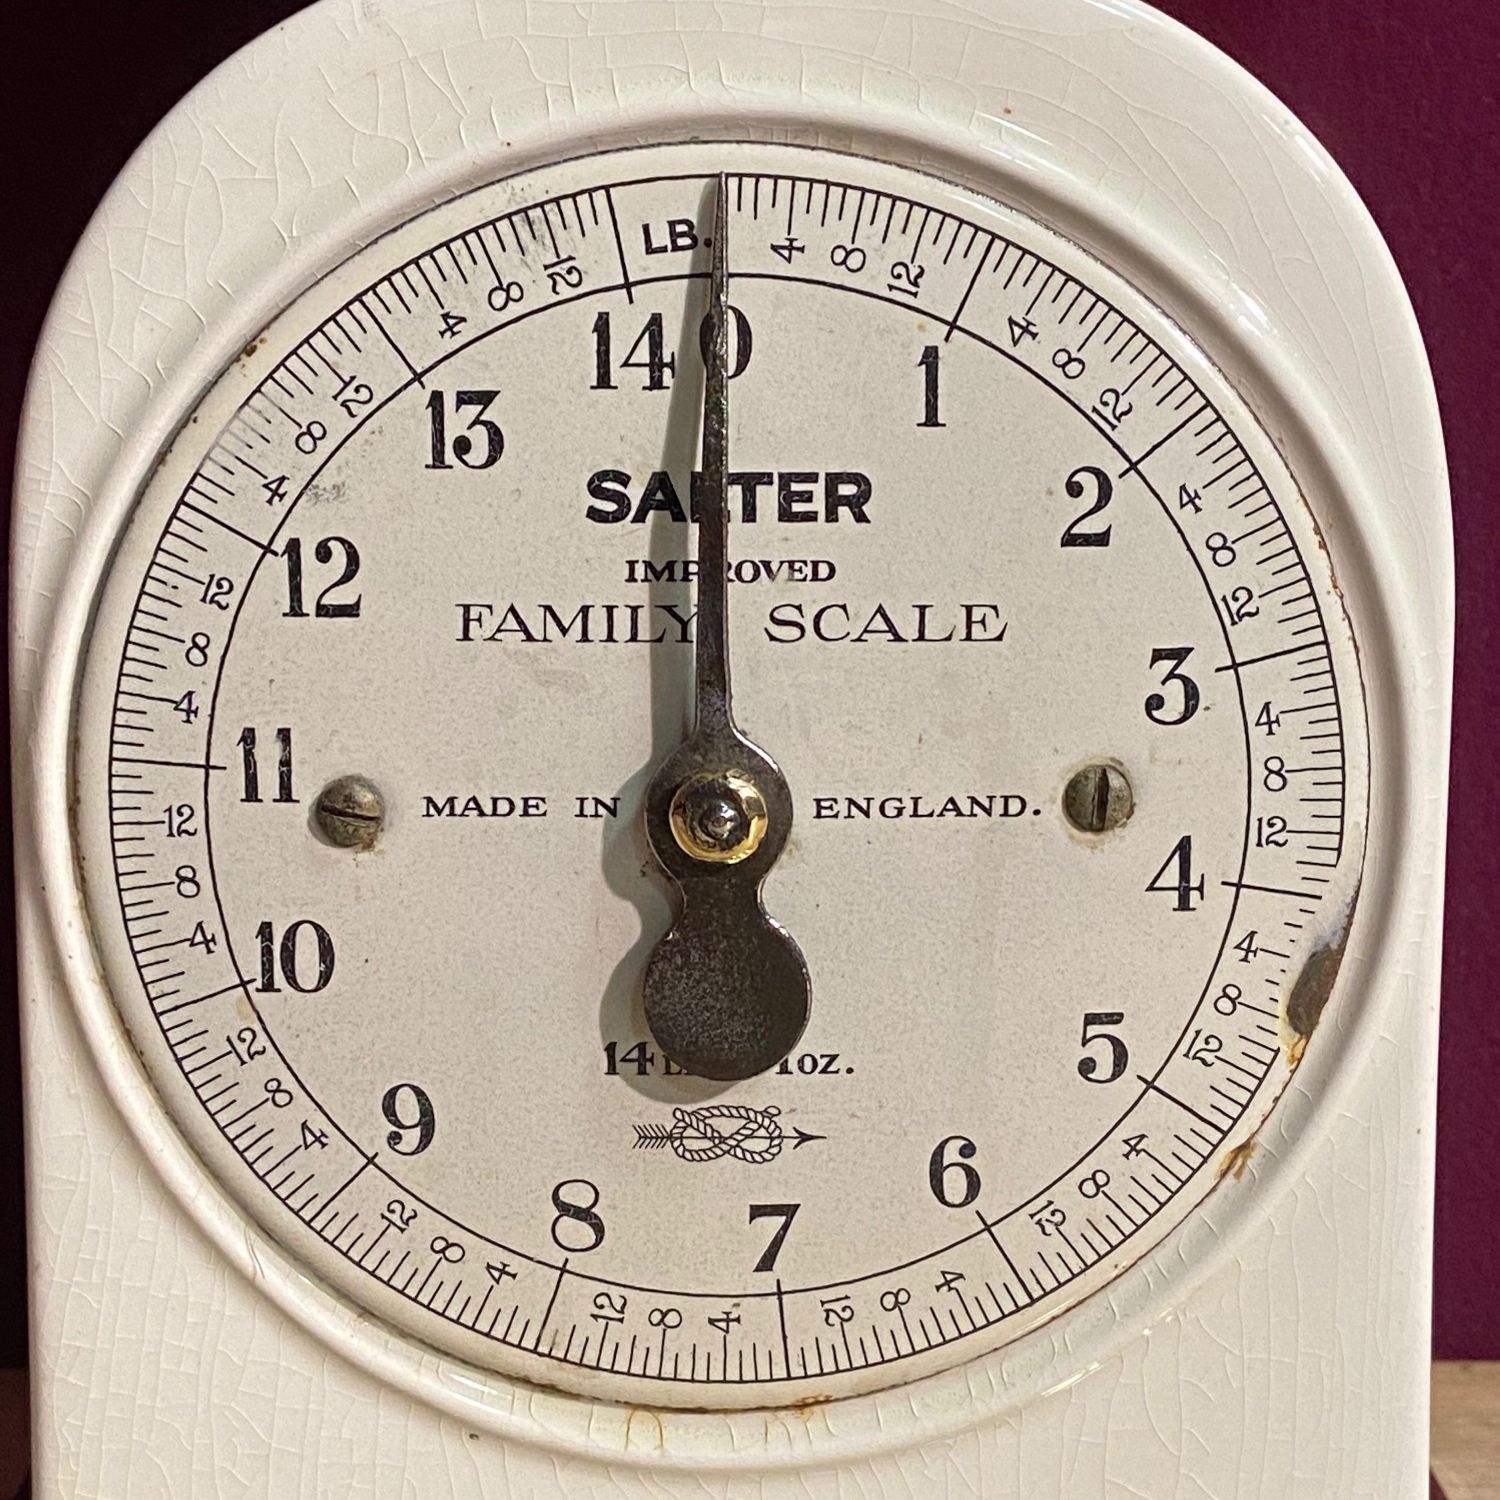 Great Set of Ceramic Salter Kitchen Scales - Gifts for Every Occasion ...